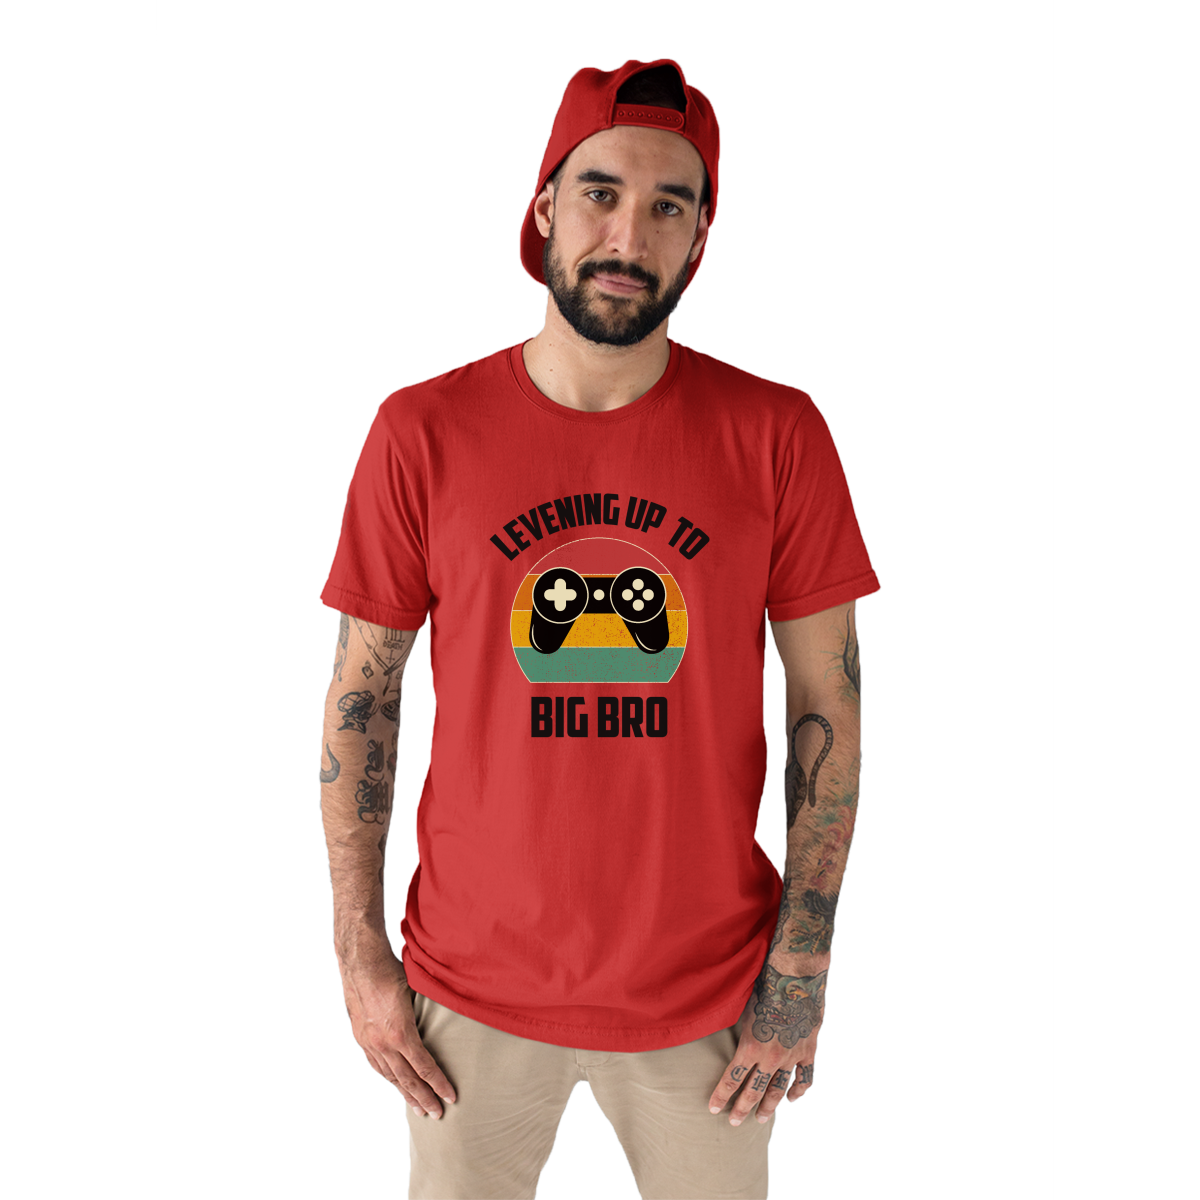 Leveling Up To Big Bro-2 Men's T-shirt | Red